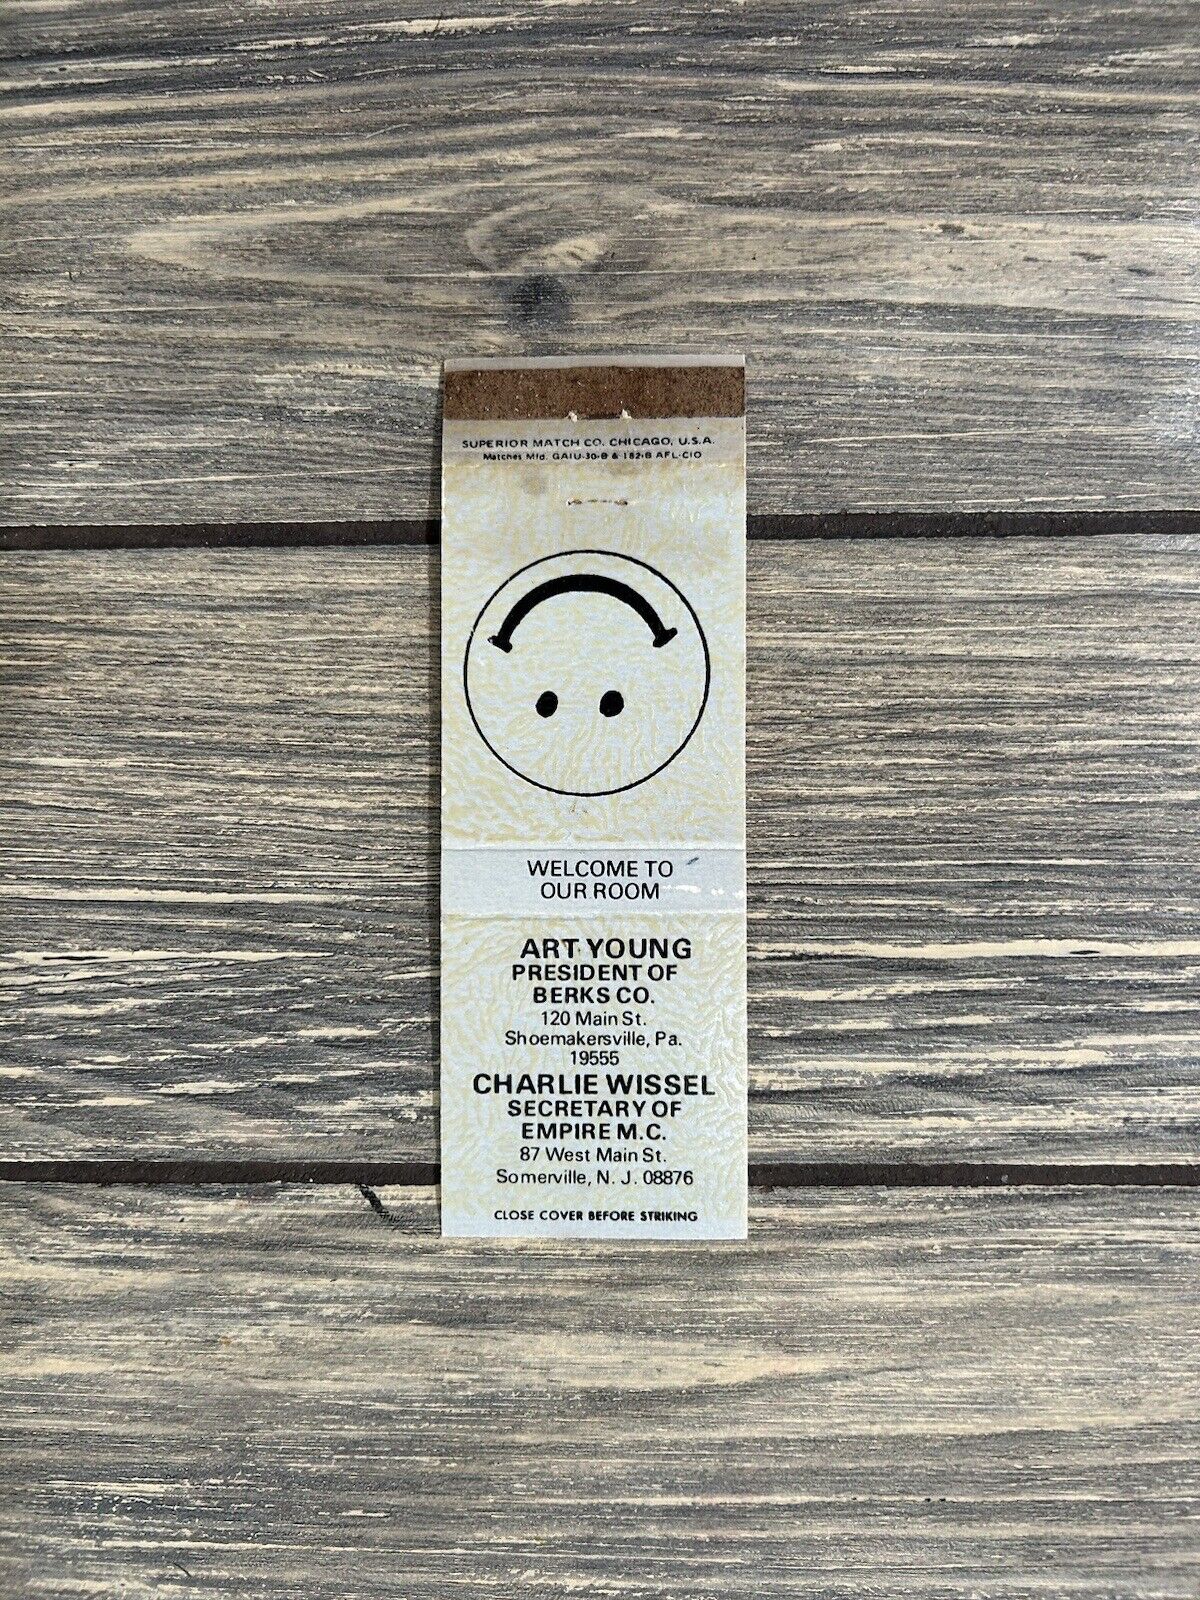 Vintage Art Young President Of Berks Co Smiley Face Matchbook Cover Ad